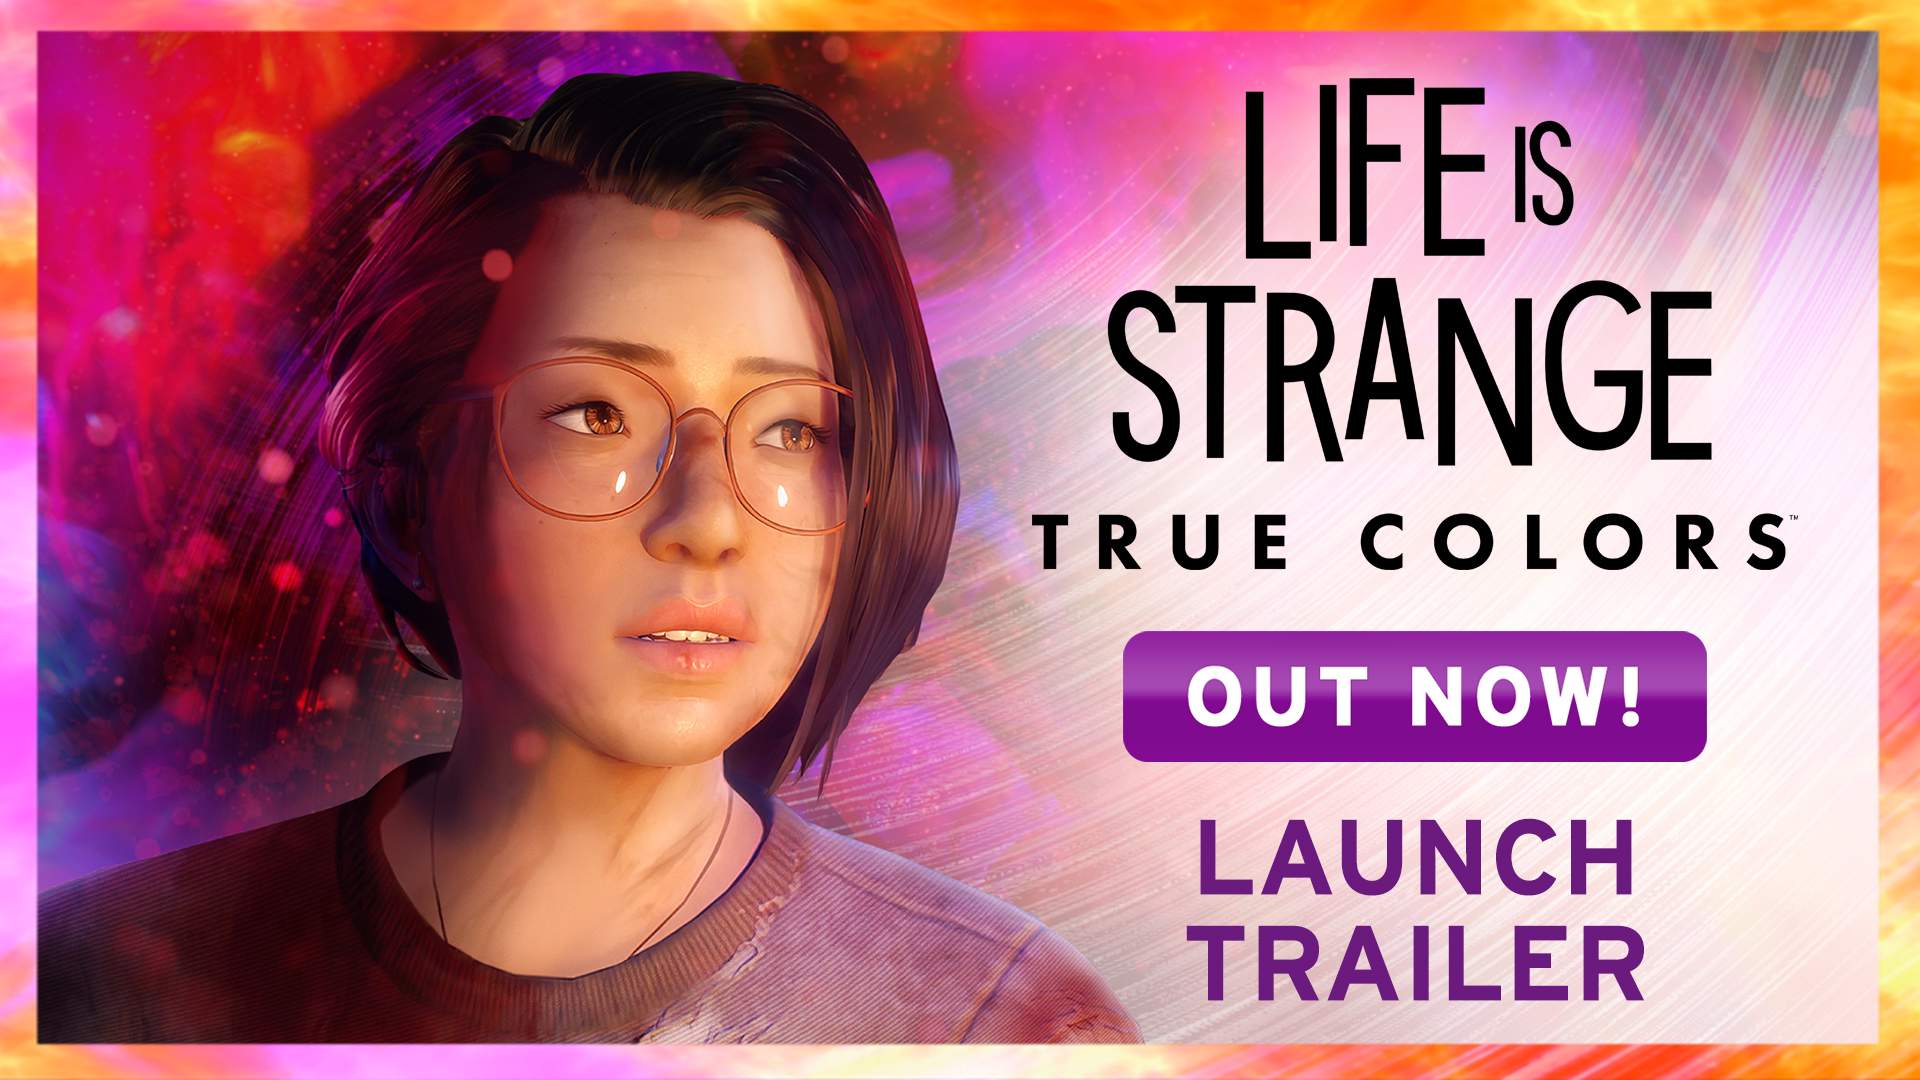 Life is Strange: True Colors is Out Now!